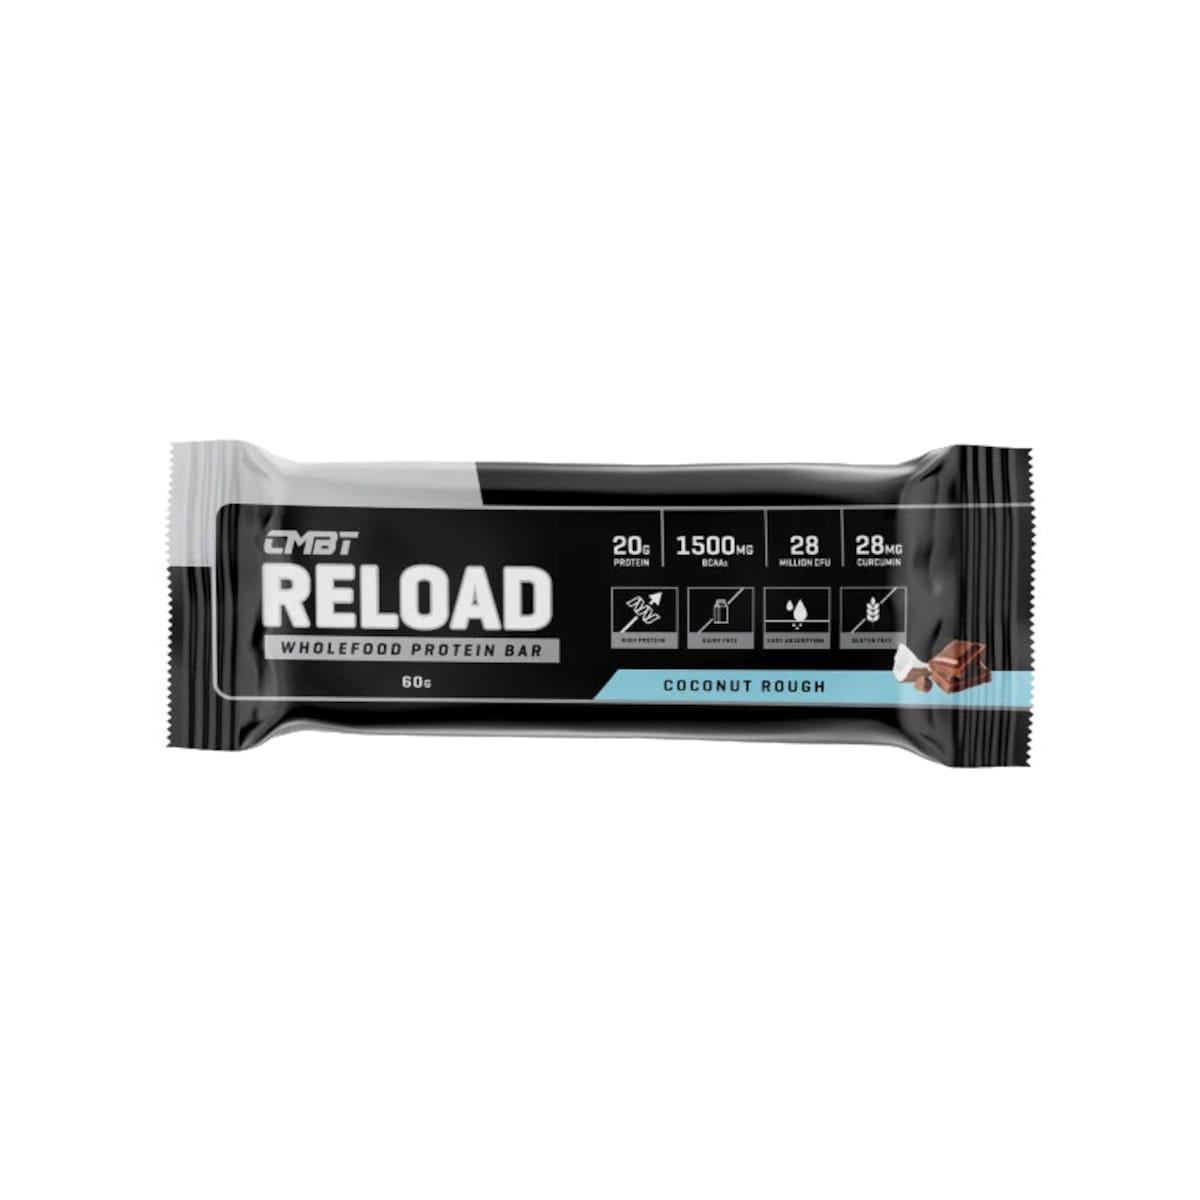 CMBT Reload Protein Bars Coconut Rough 10 x 60g